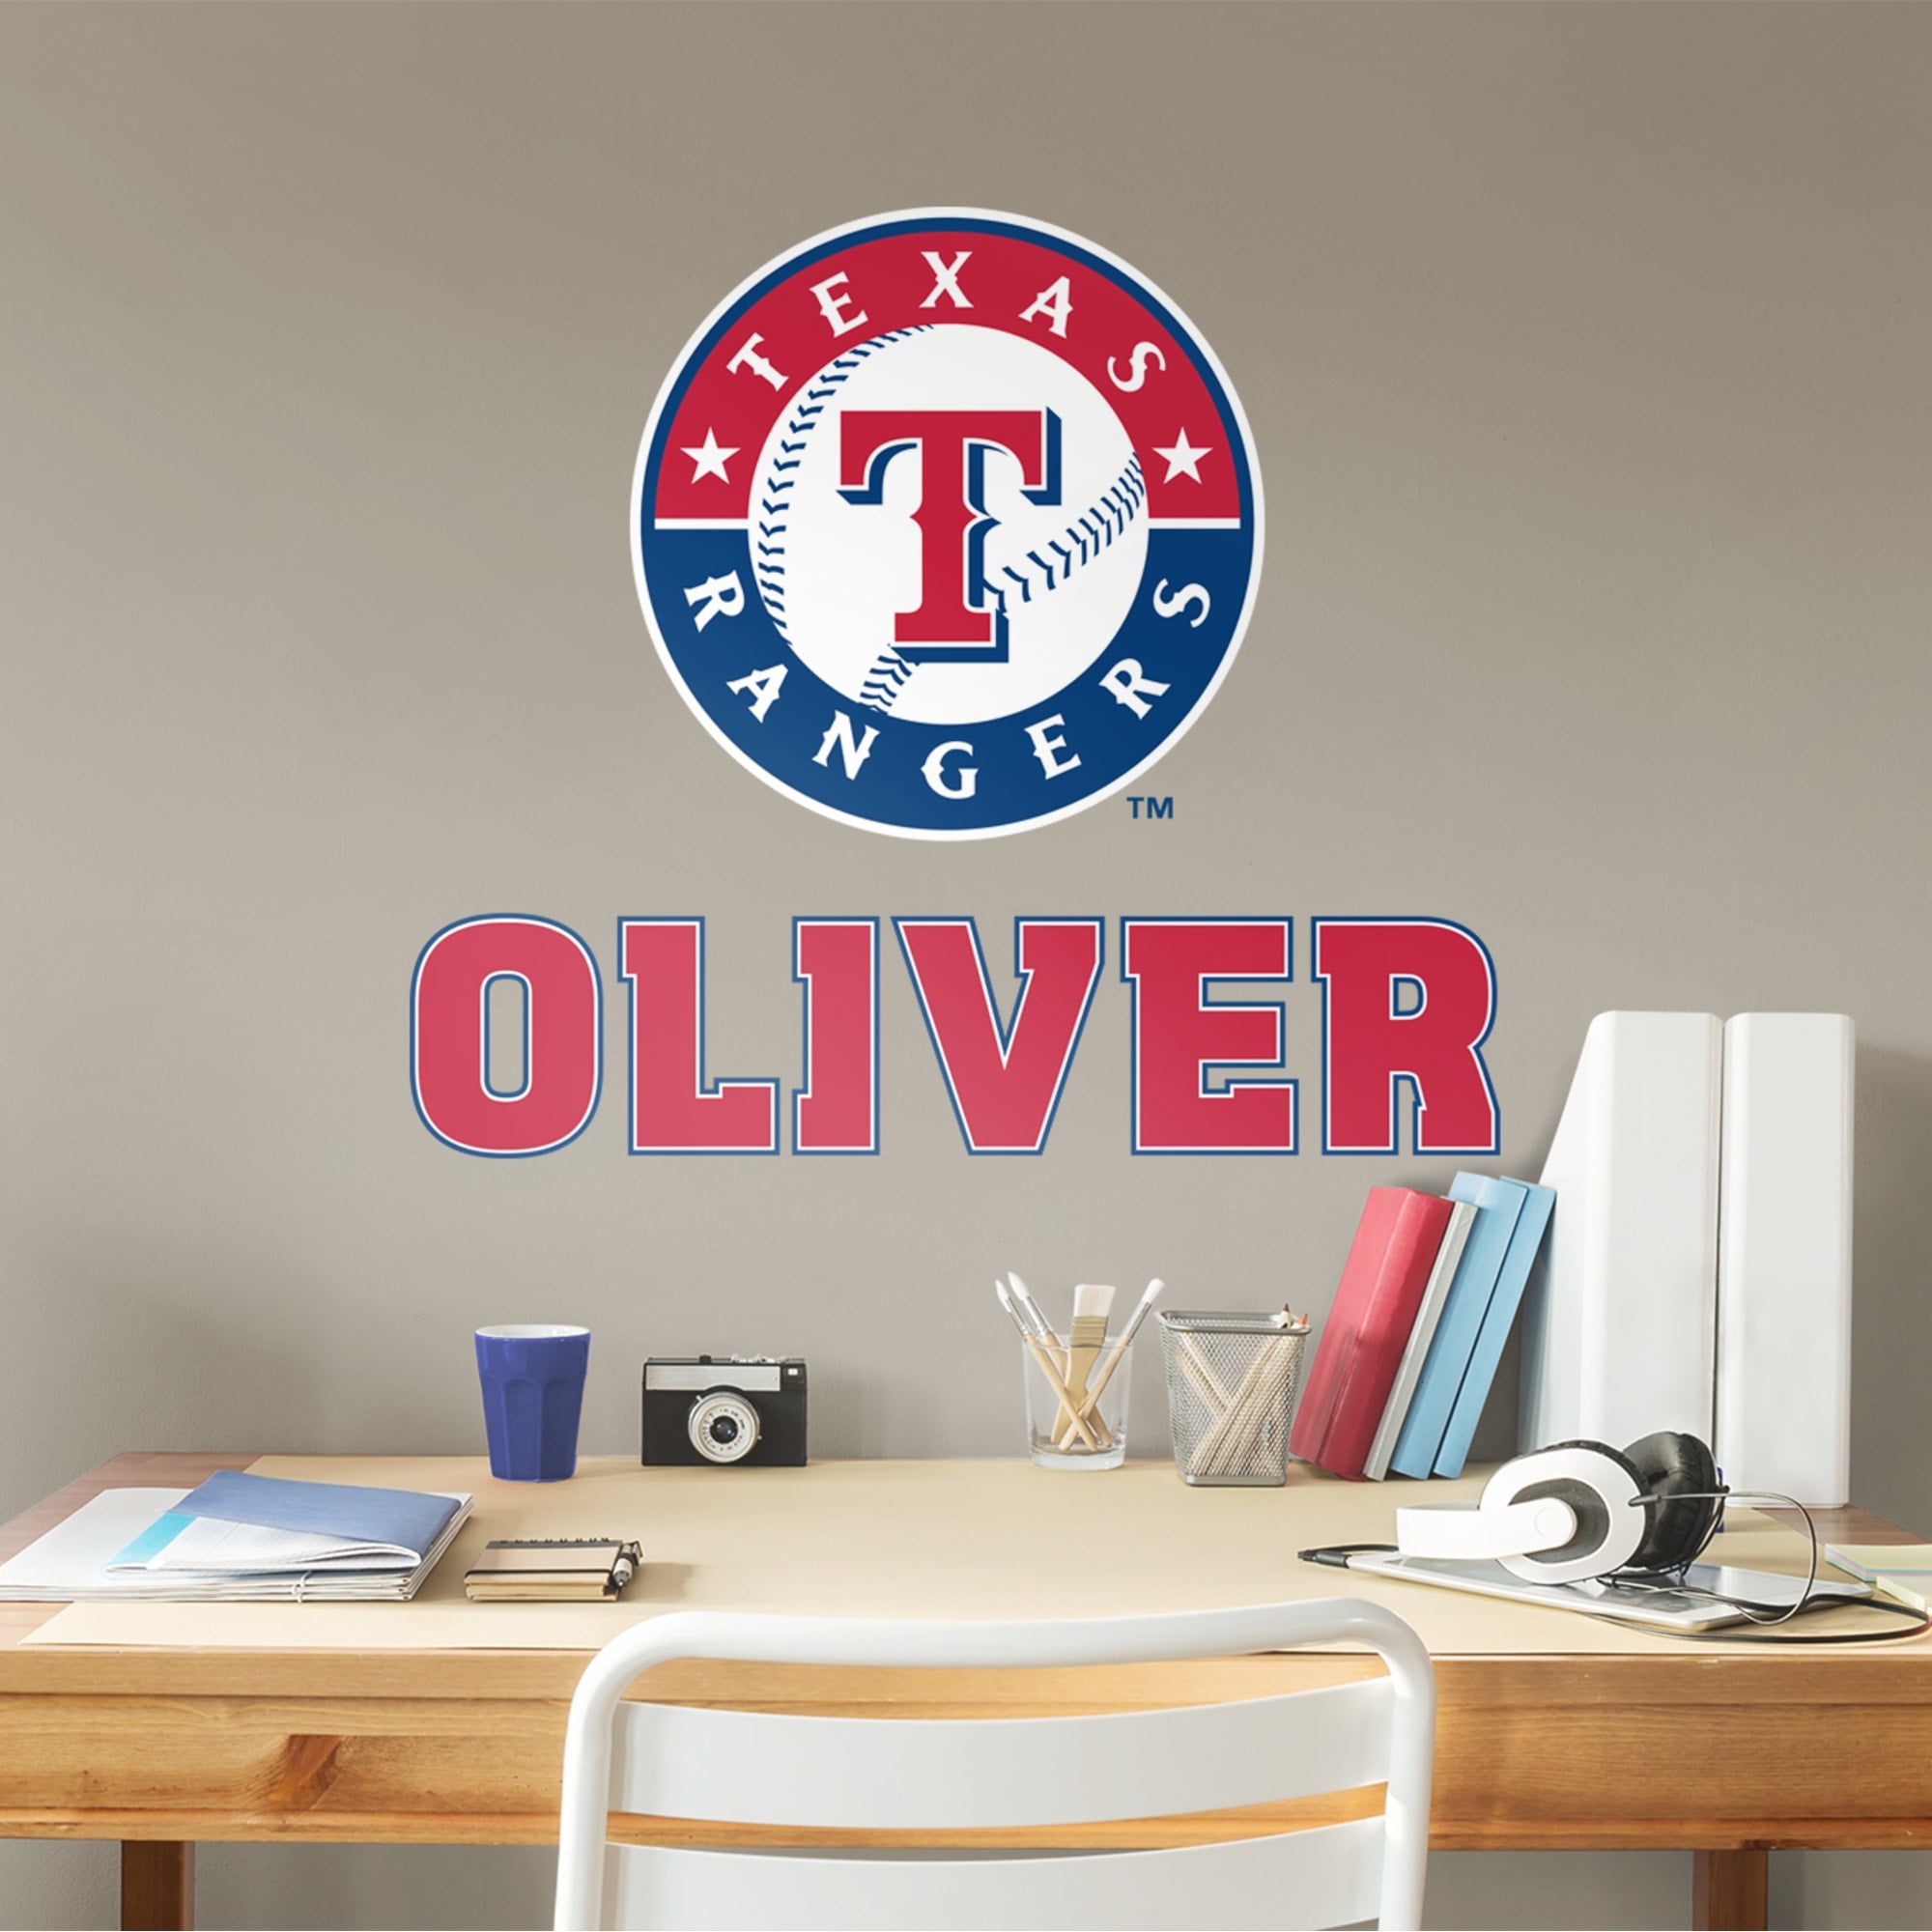 Texas Rangers: Stacked Personalized Name - Officially Licensed MLB Transfer Decal in Red (52"W x 39.5"H) by Fathead | Vinyl